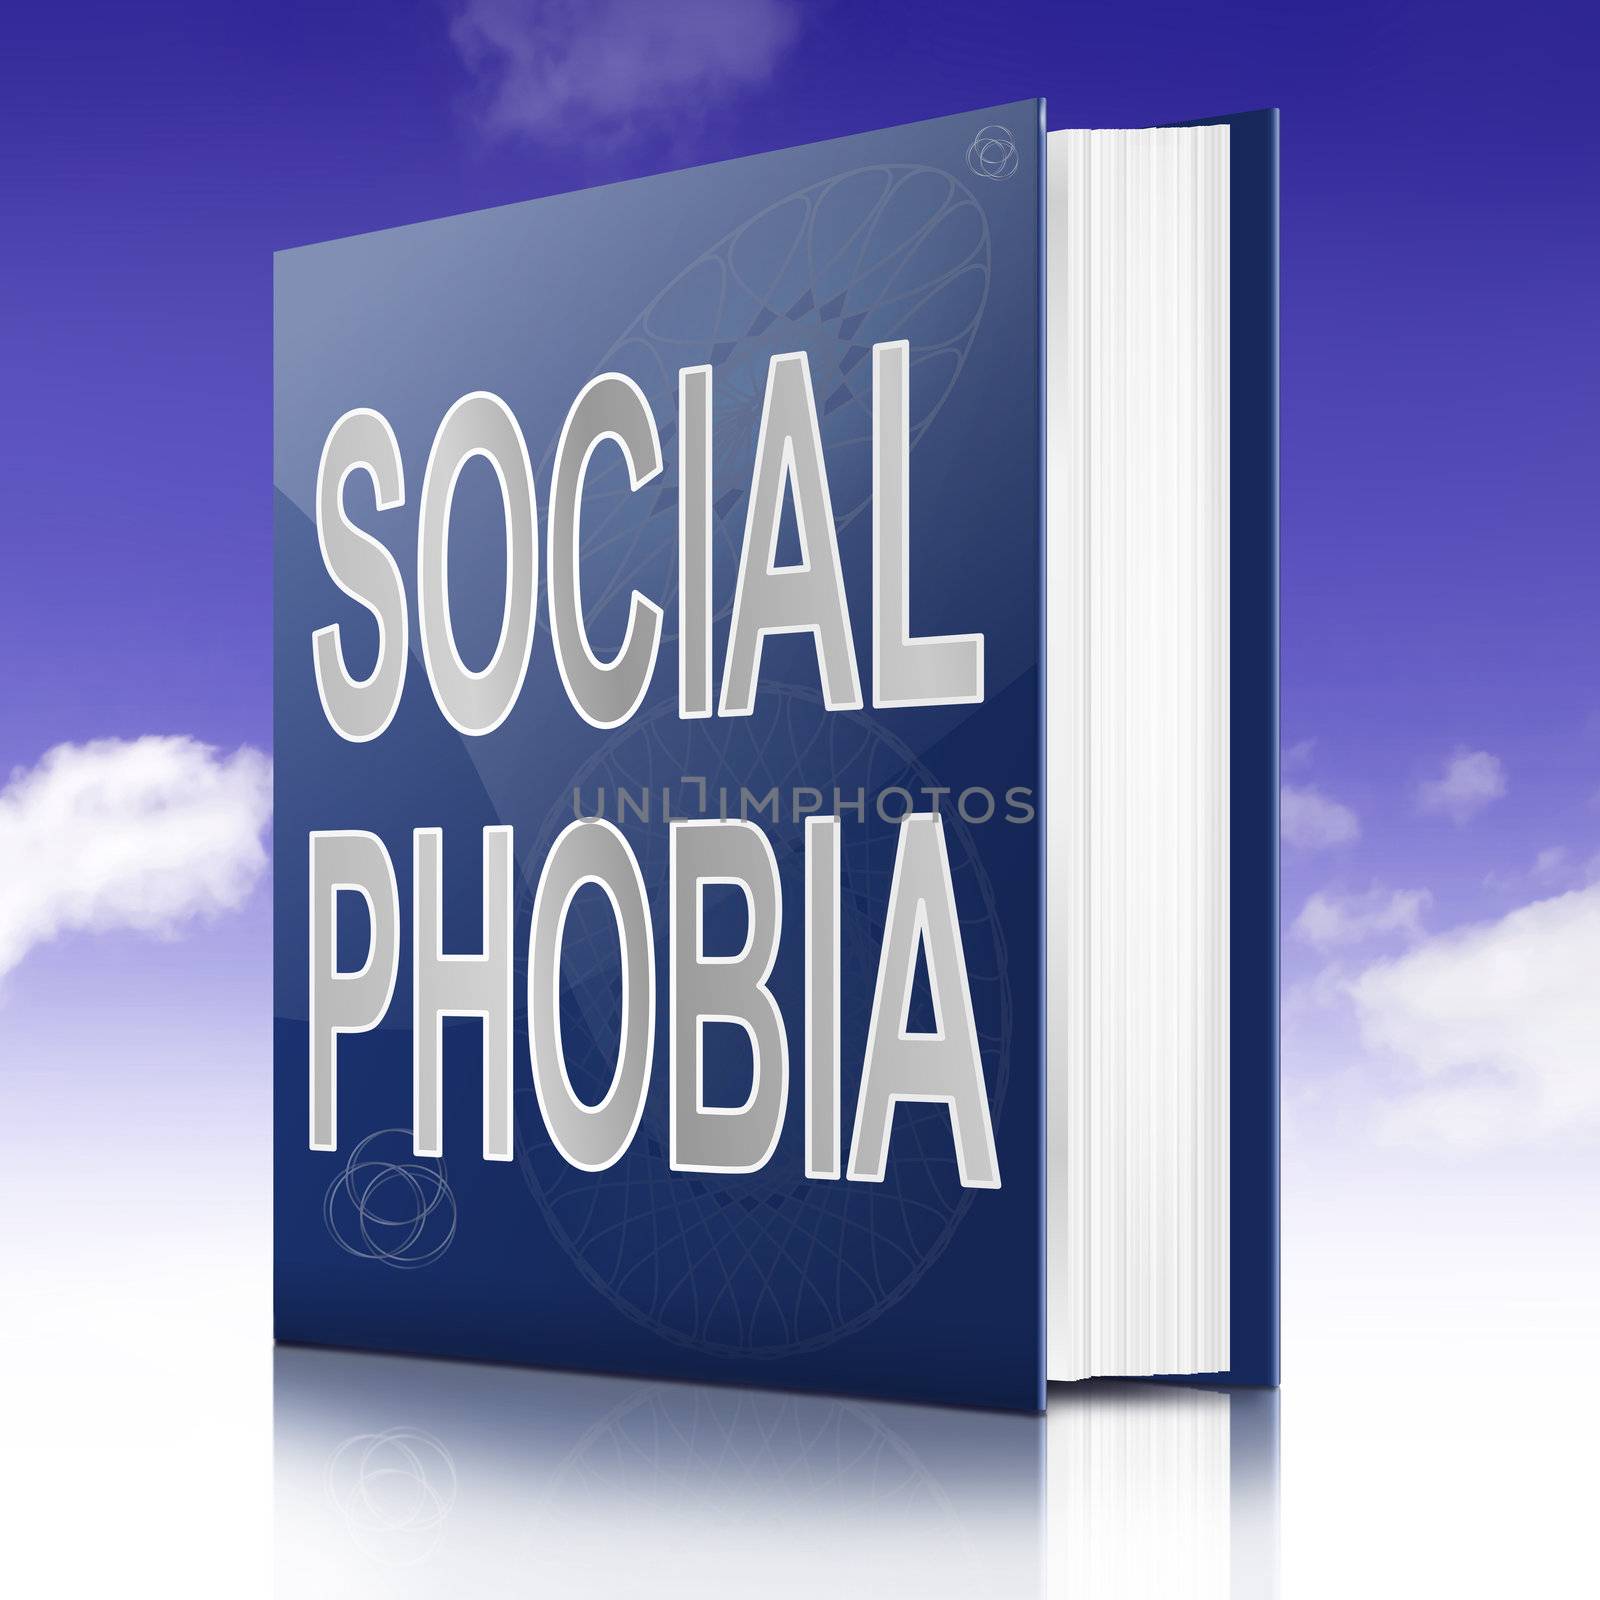 Social Phobia concept. by 72soul